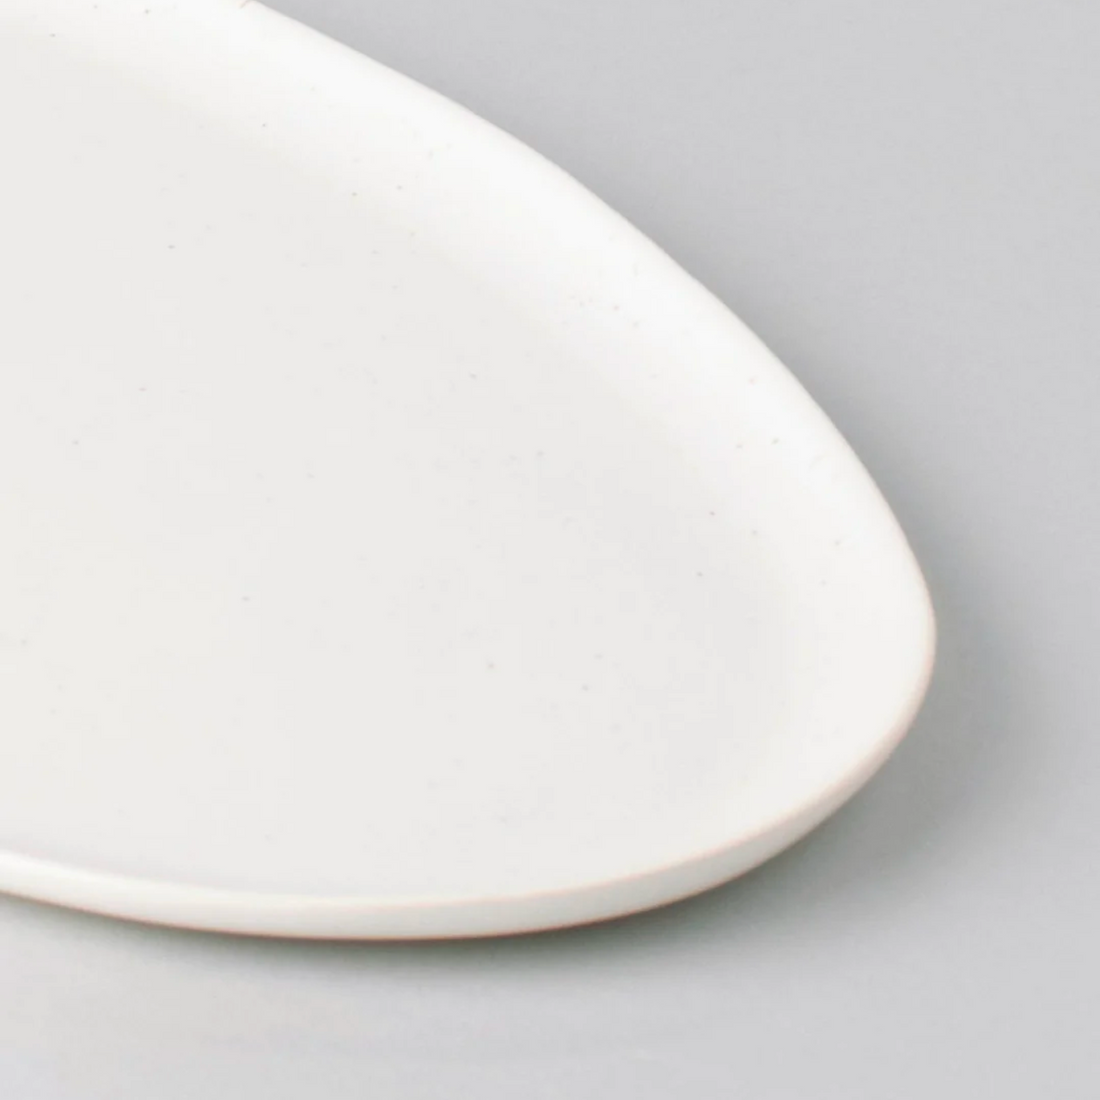 Fable Oval Platter - Speckled White